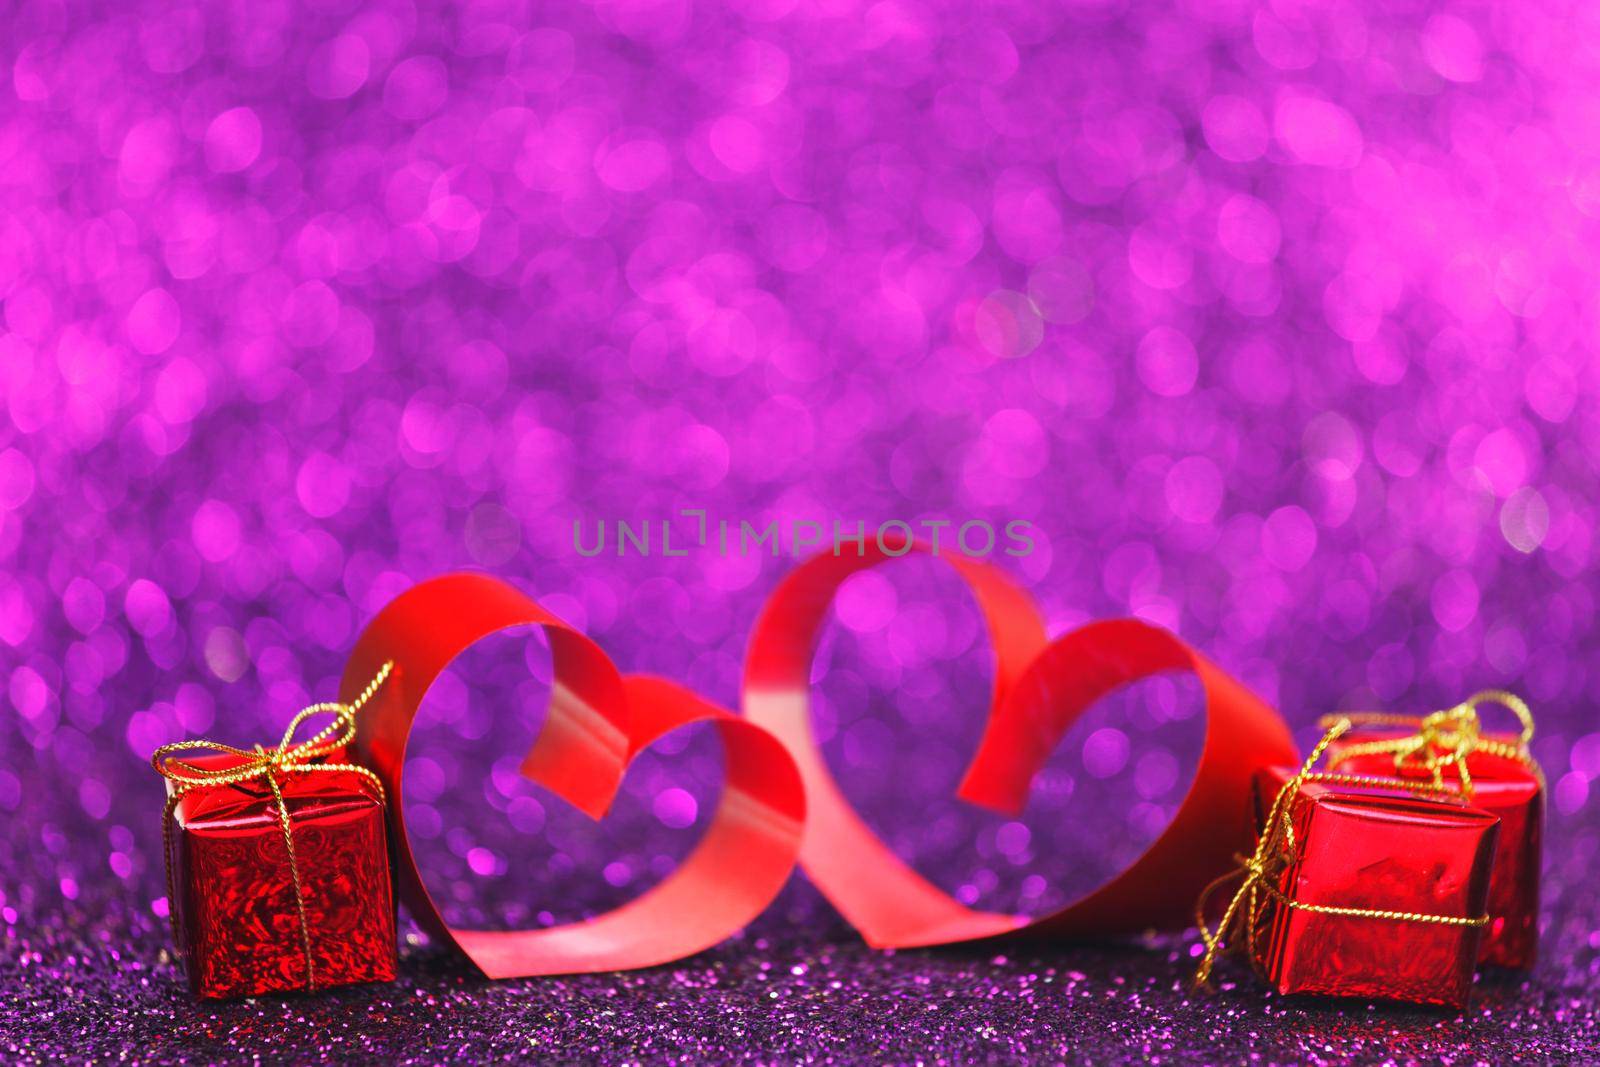 Decorative hearts of red ribbon and gifts on shiny purple glitter background